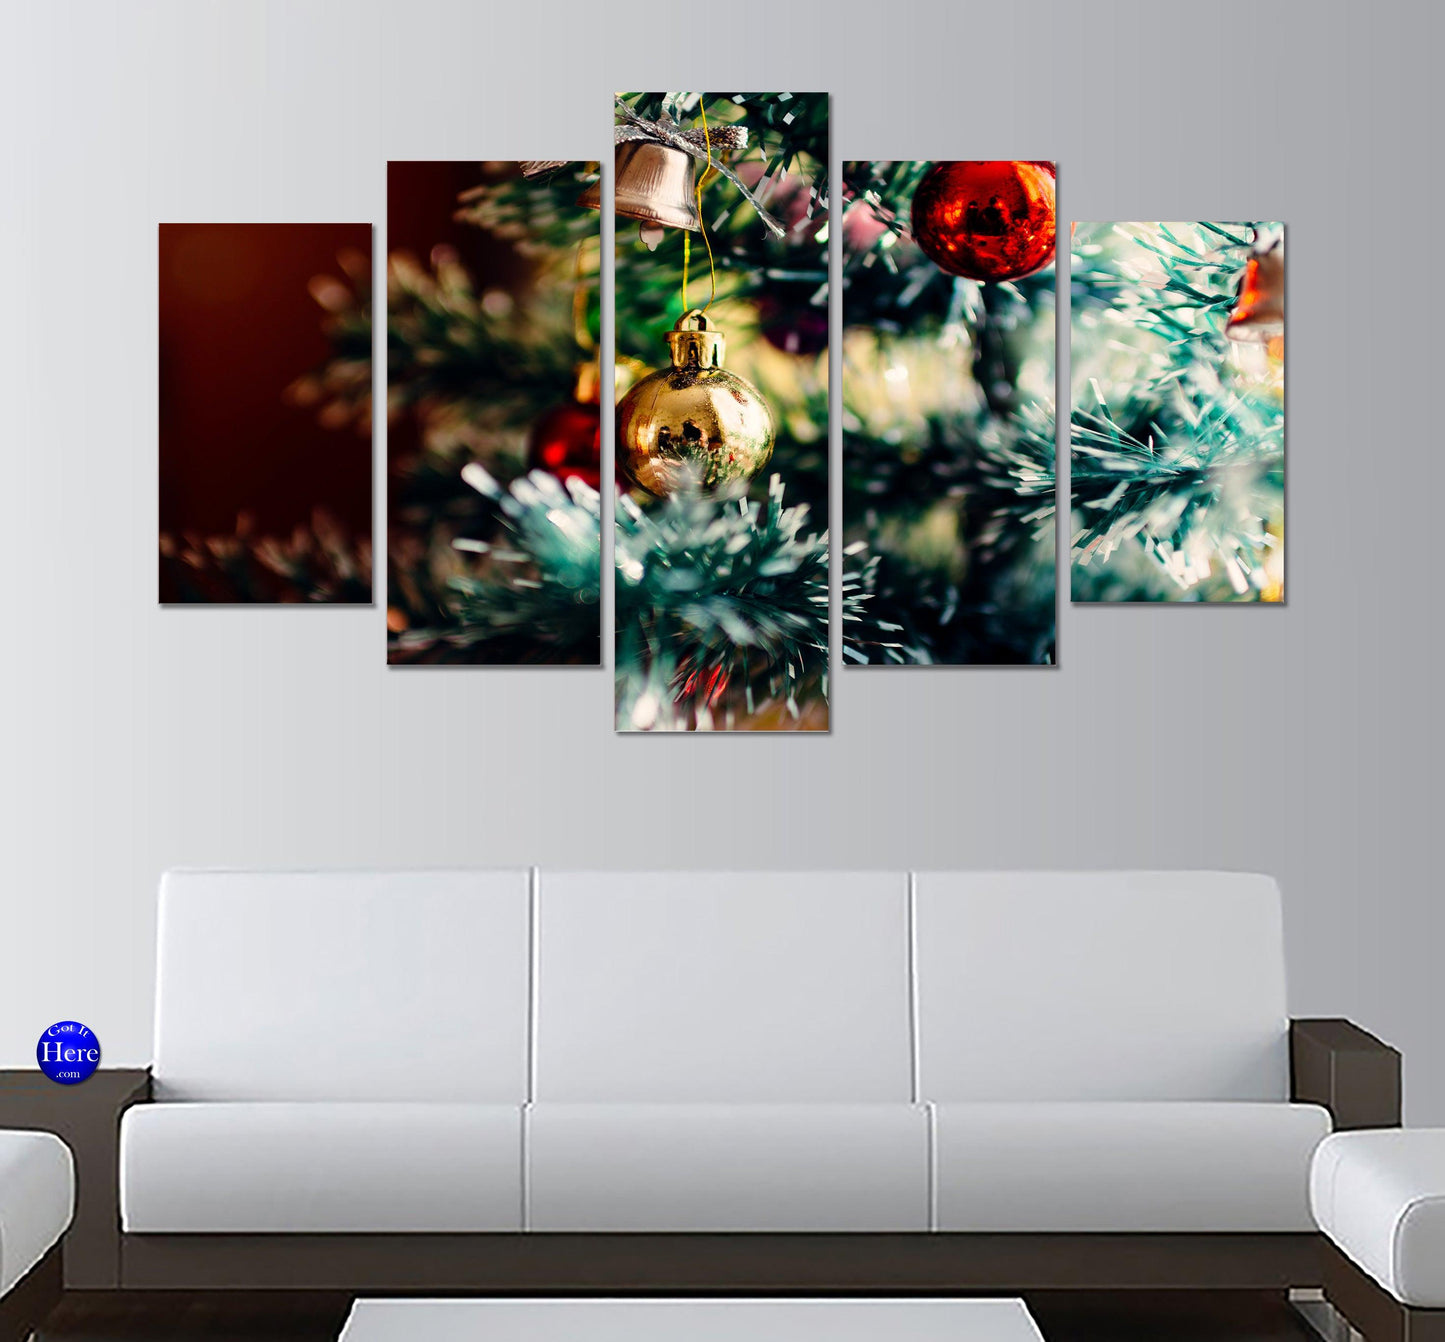 Baubles Ornaments On Christmas Tree 5 Panel Canvas Print Wall Art - GotItHere.com